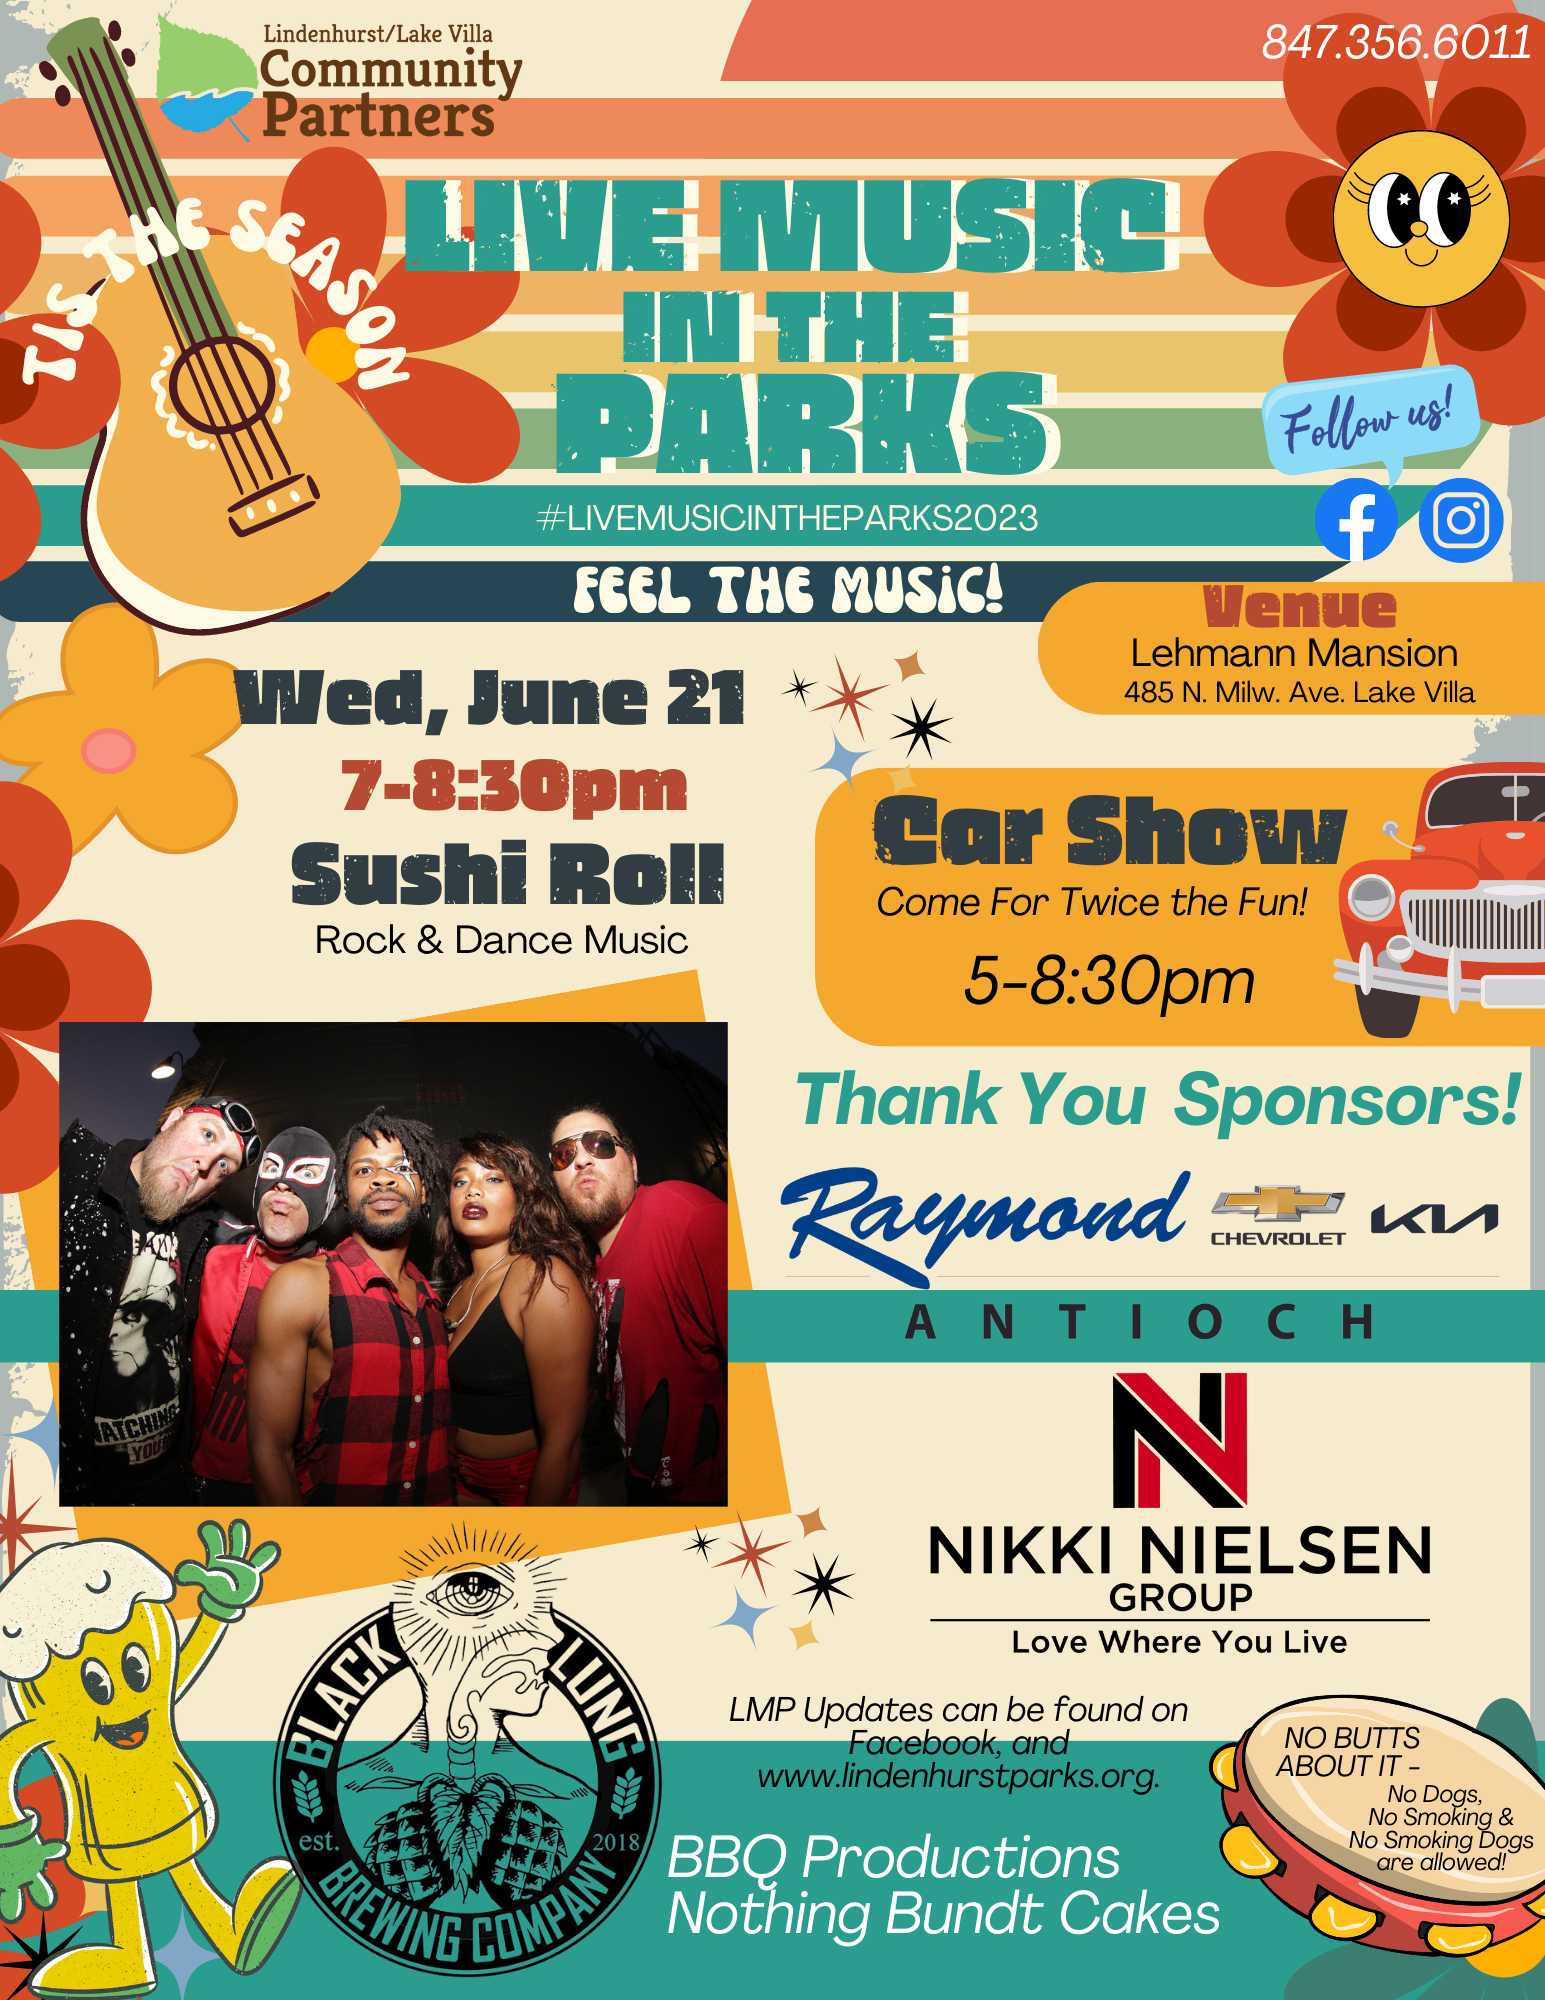 
A lively flyer promoting the "LIVE MUSIC IN THE PARKS" event on Wednesday, June 21, from 7-8:30 pm, featuring the band Sushi Roll, with rock and dance music. The venue is Lehmann Mansion in Lake Villa, and the event includes a car show from 5-8:30 pm. The flyer thanks sponsors such as Raymond Chevrolet, Antioch, and the Nikki Nielsen Group, along with Black Lung Brewing and BBQ Productions. It notes the no pets, no smoking, and no smoking dogs policies, and encourages following on social media for updates.